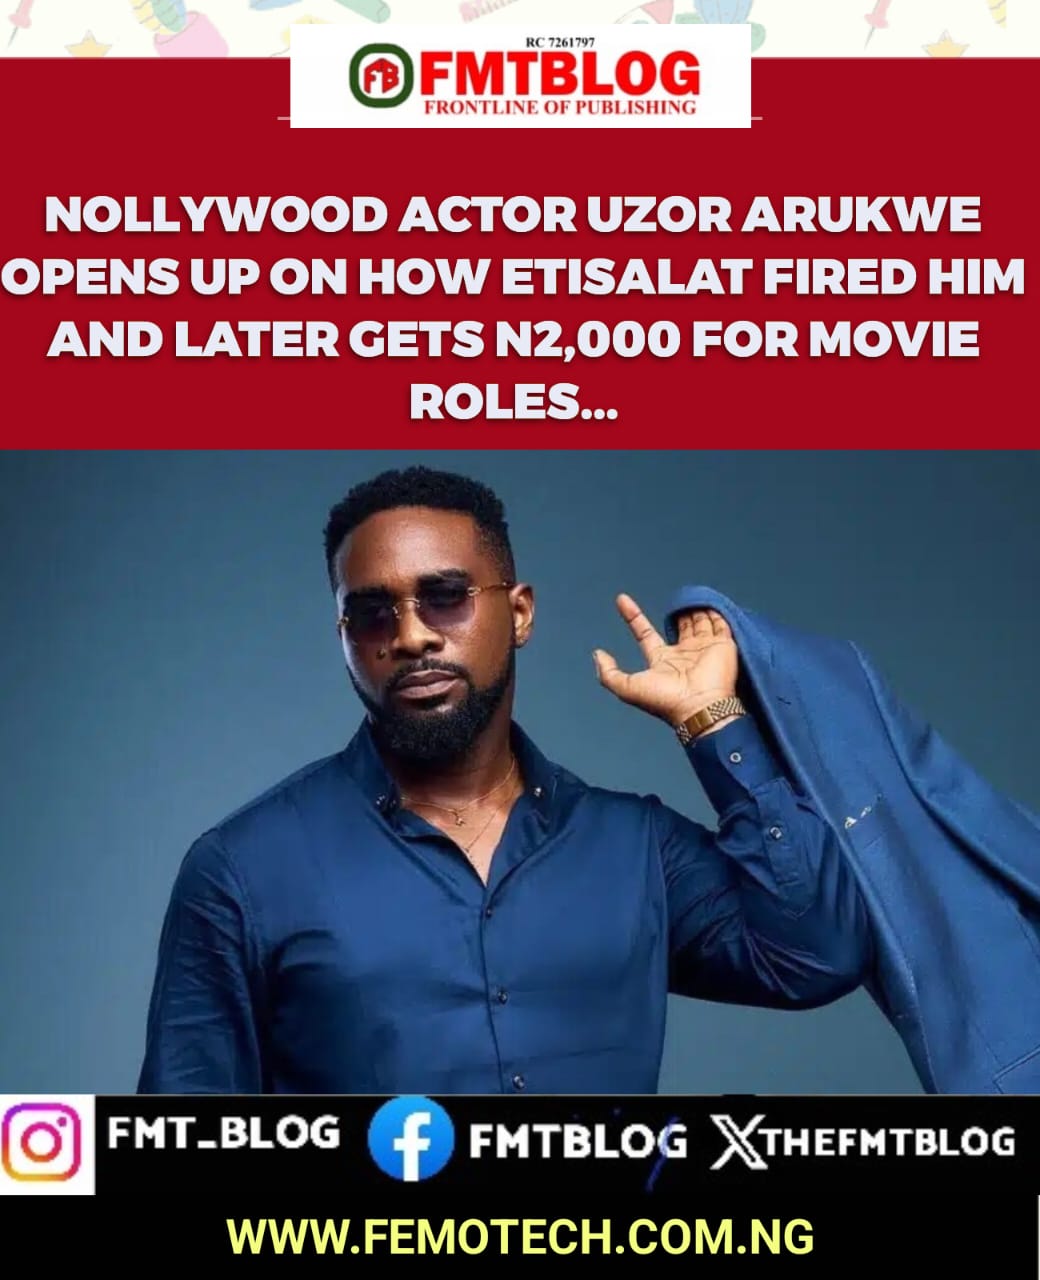 Nollywood Actor Uzor Arukwe Opens Up On How Etisalat Fired Him And Later Gets N2,000 For Movie Roles(Video